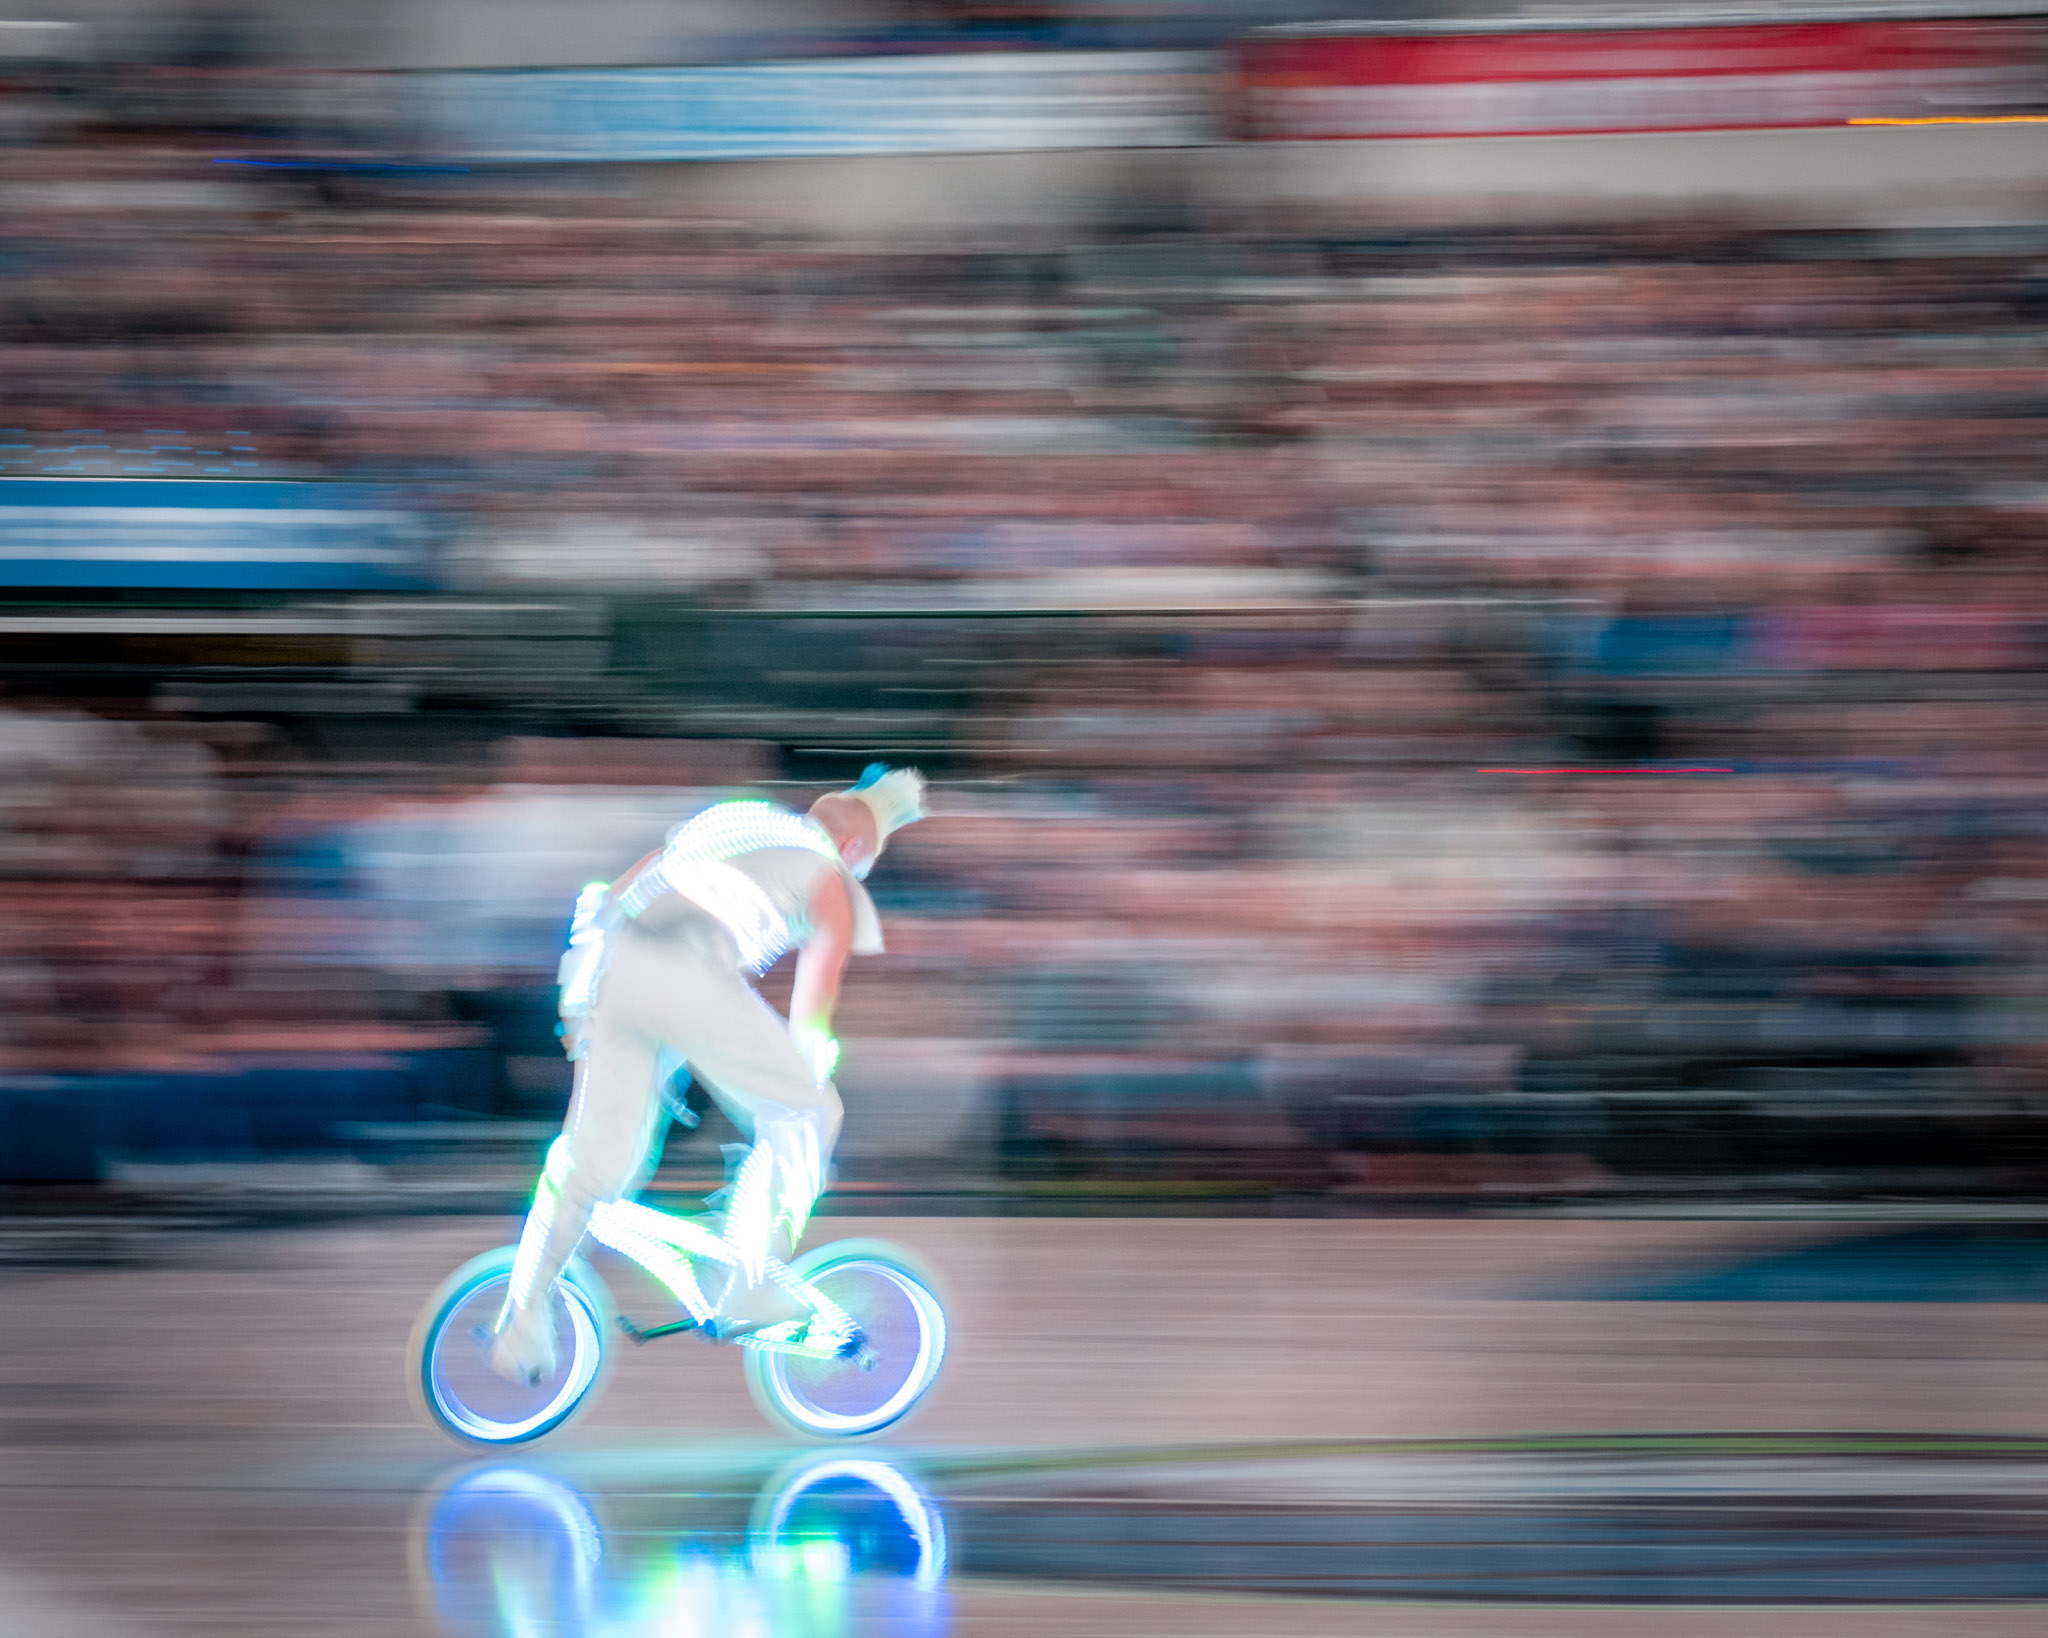 a man riding a bicycle with lights on